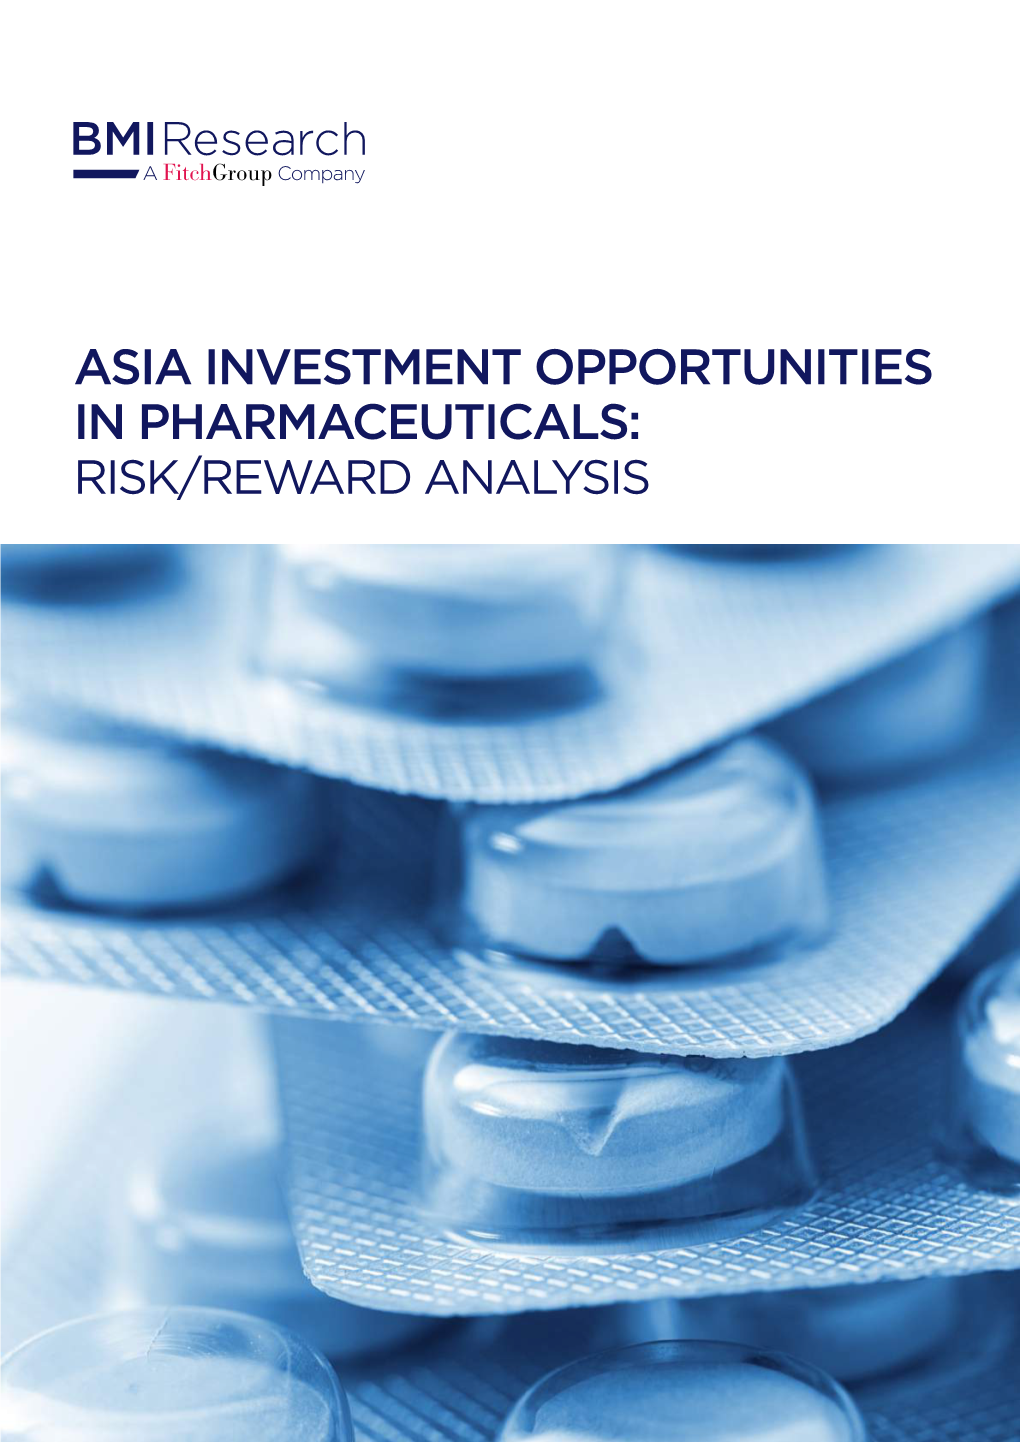 Asia Pacific Pharmaceuticals: Multitude of Risks and Rewards to Characterise Region